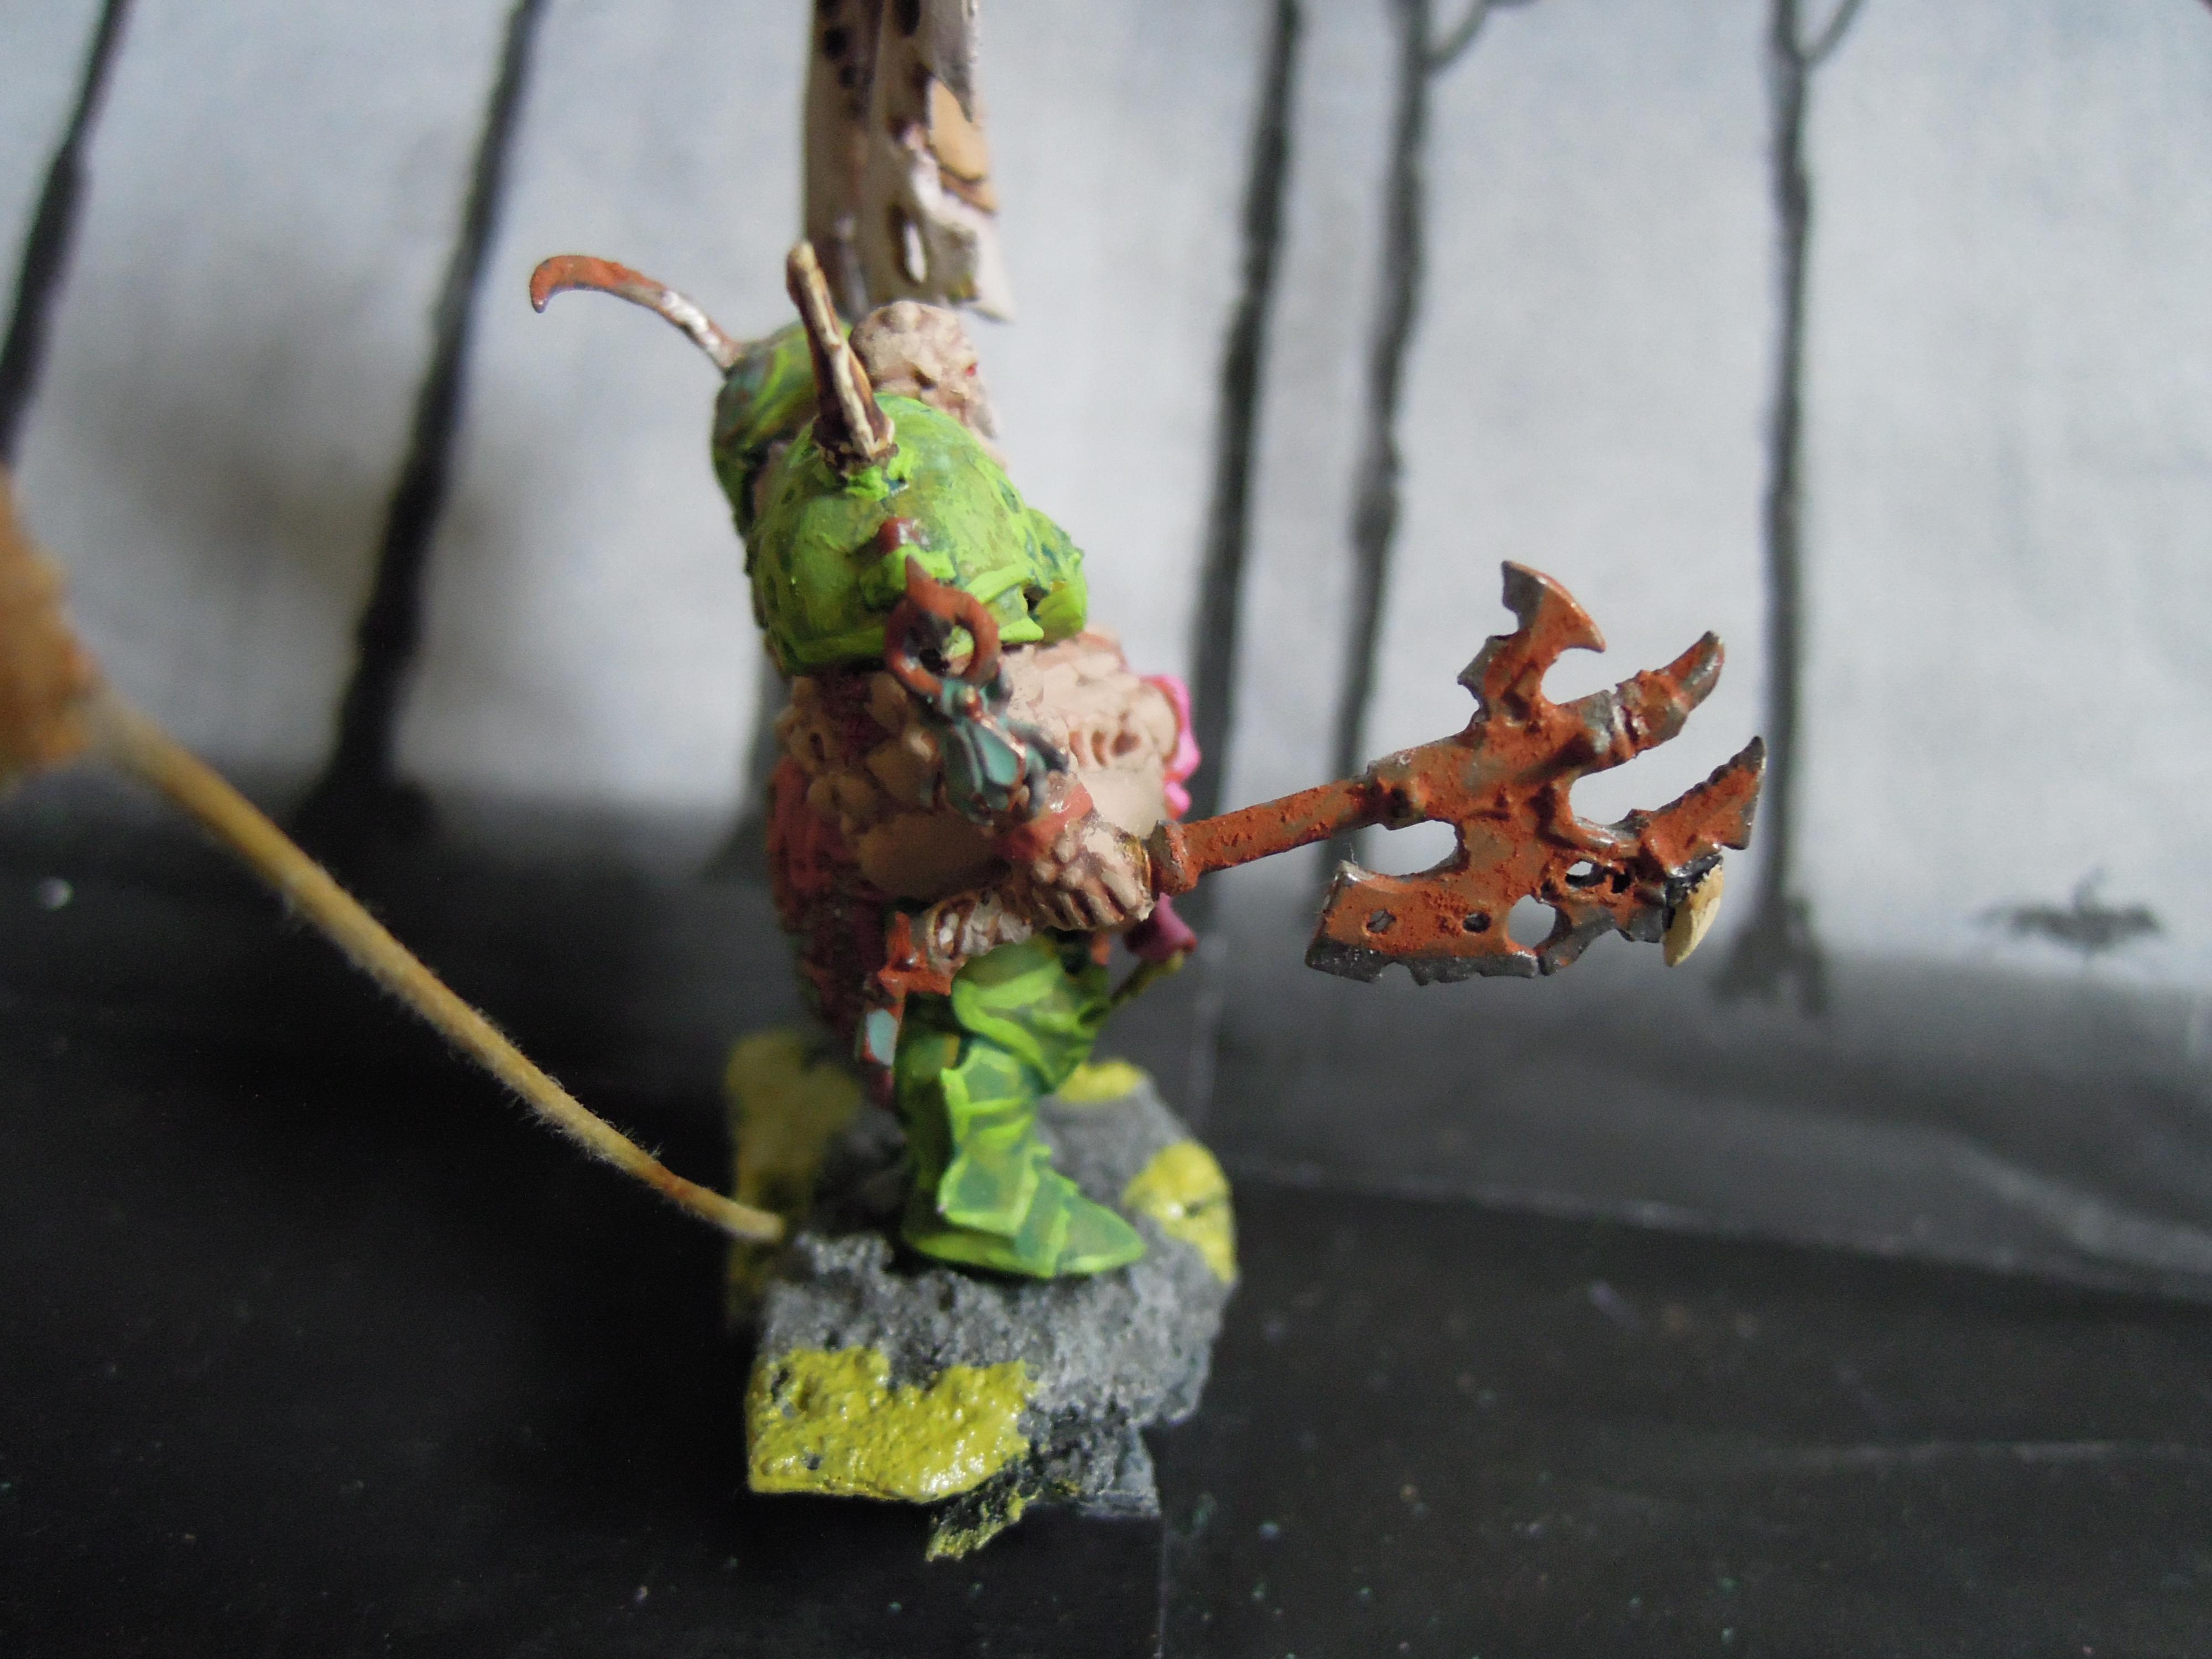 Age Of Sigmar, Axe, Banner, Blight, Boils, Buboes, Chaos, Conversion, Decay, Disease, Glottkin, Lord, Nurgle, Otto Glott, Pestilence, Plague, Rot, Spoilage, Warriors